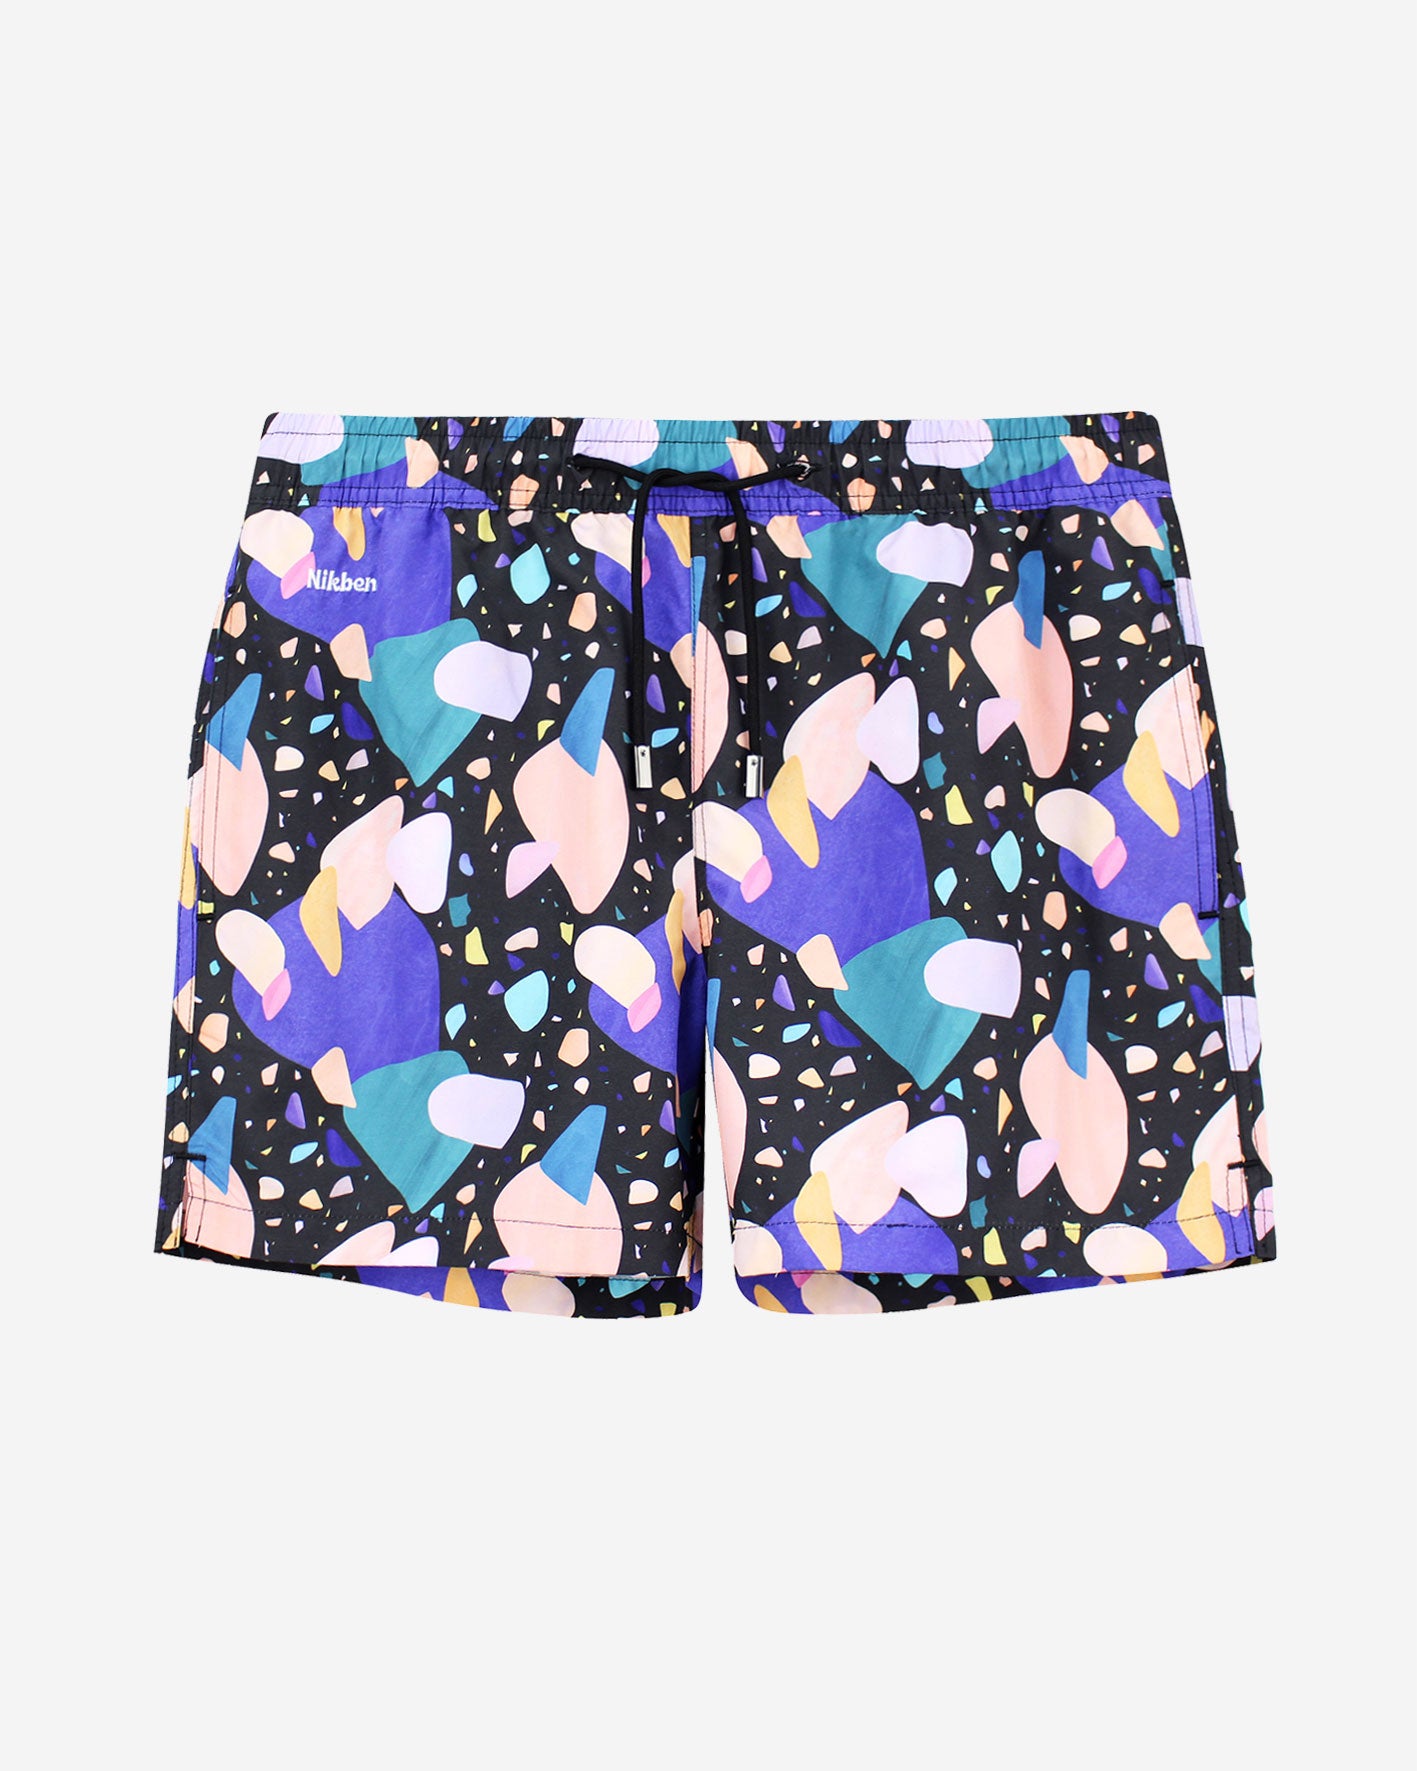 Multicolor swim trunks with logo and drawstring